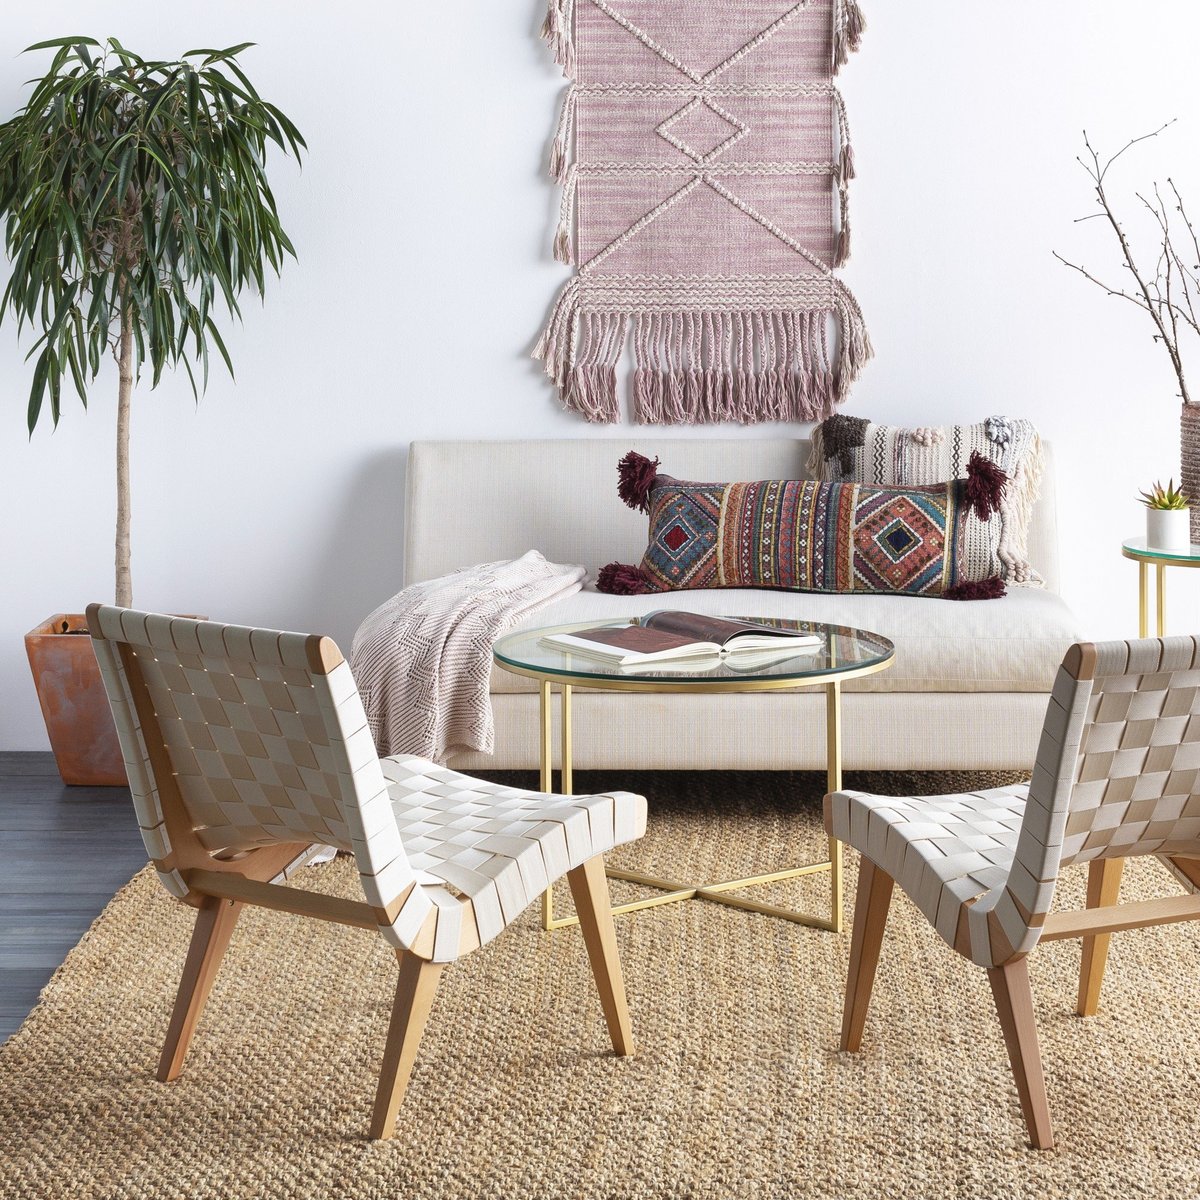 Add Natural Fiber to your living room with a natural-styled rug